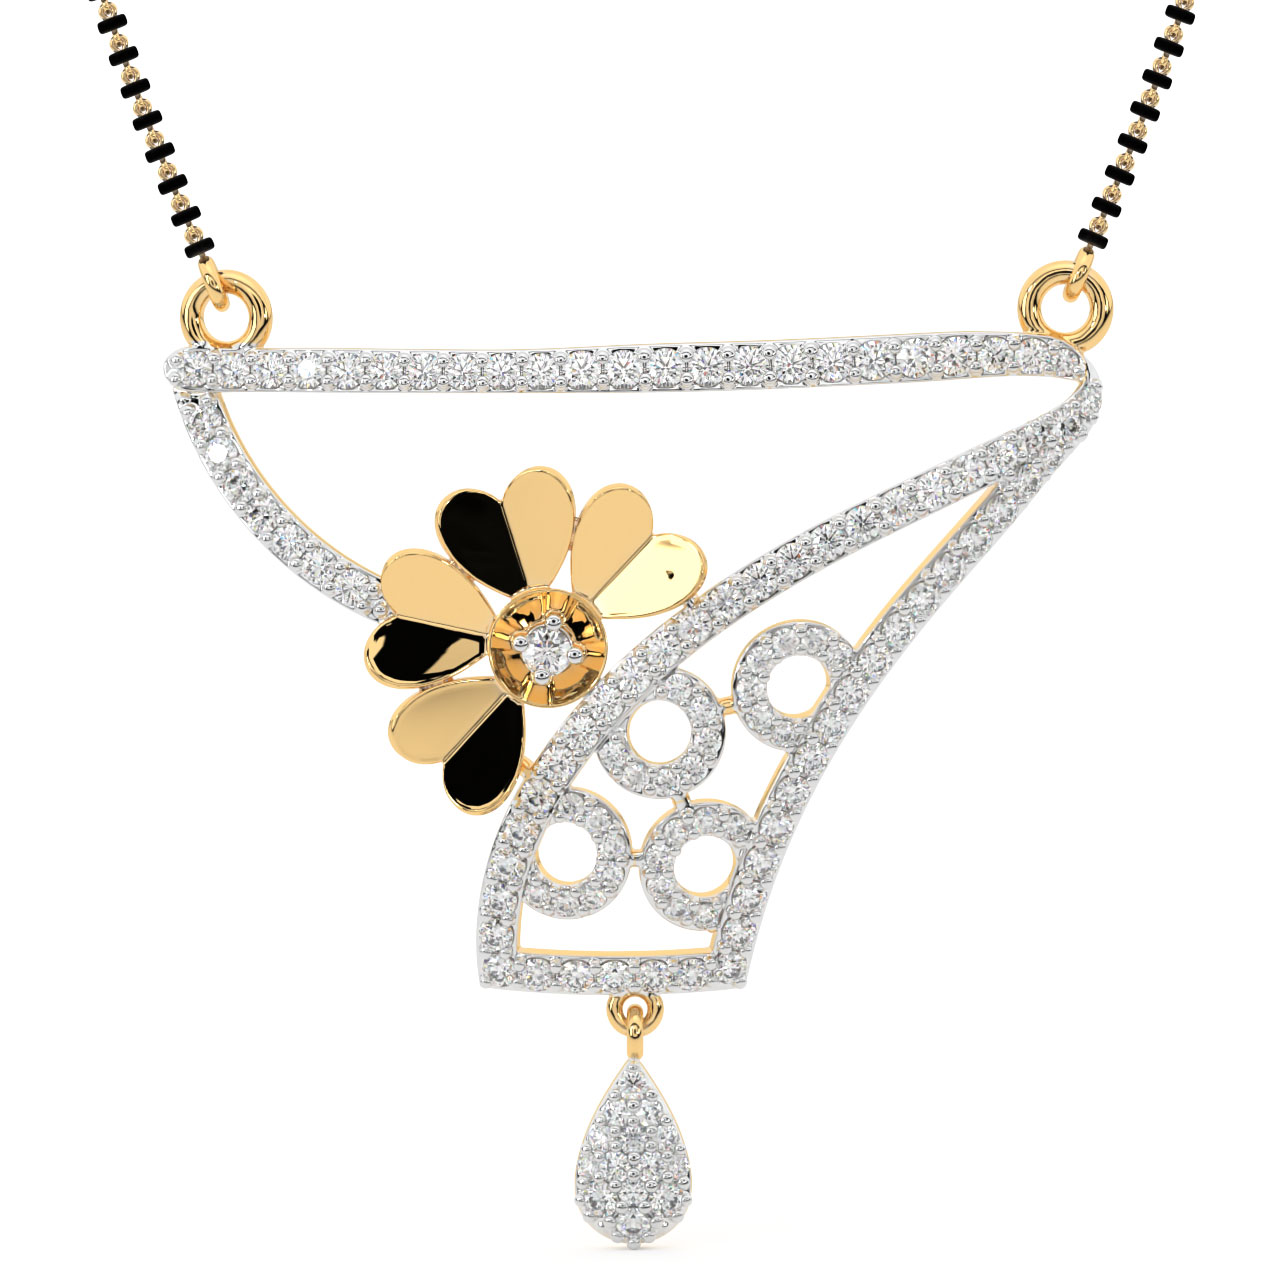 New Mangalsutra Design In Gold